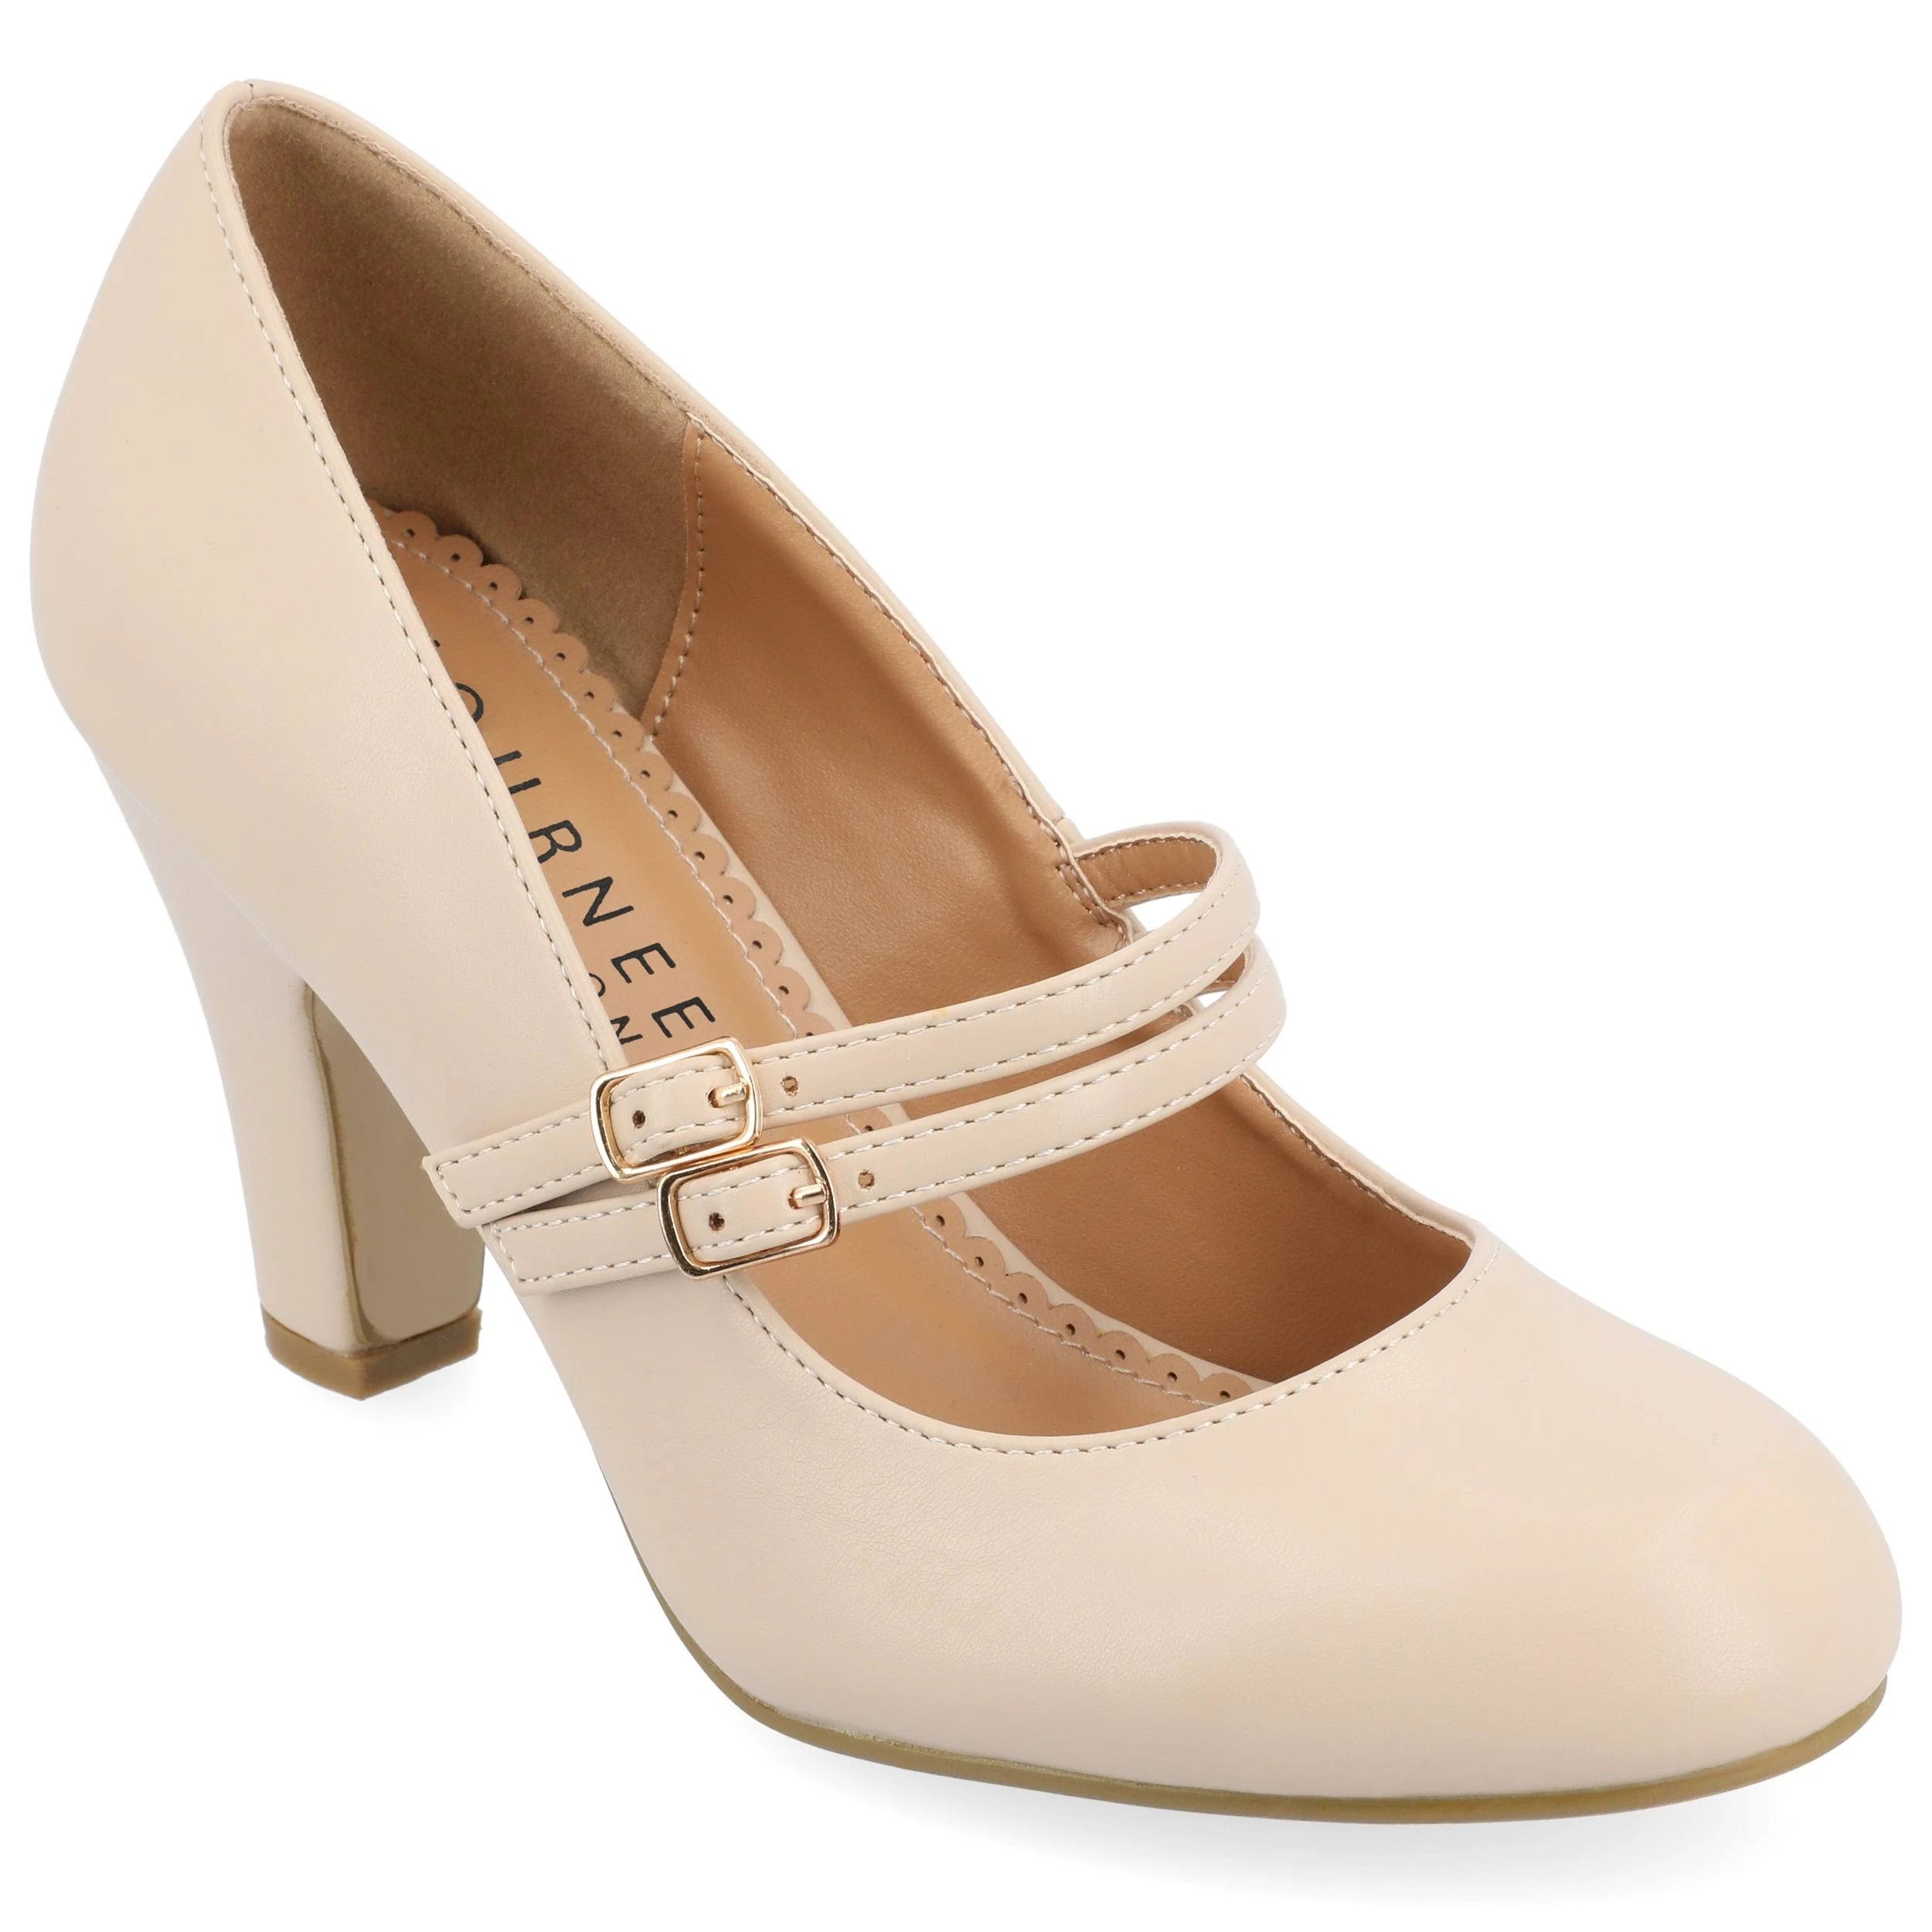 Nude Vegan Mary Jane Pumps with Buckle Straps and Comfortable Cone Heel | Image